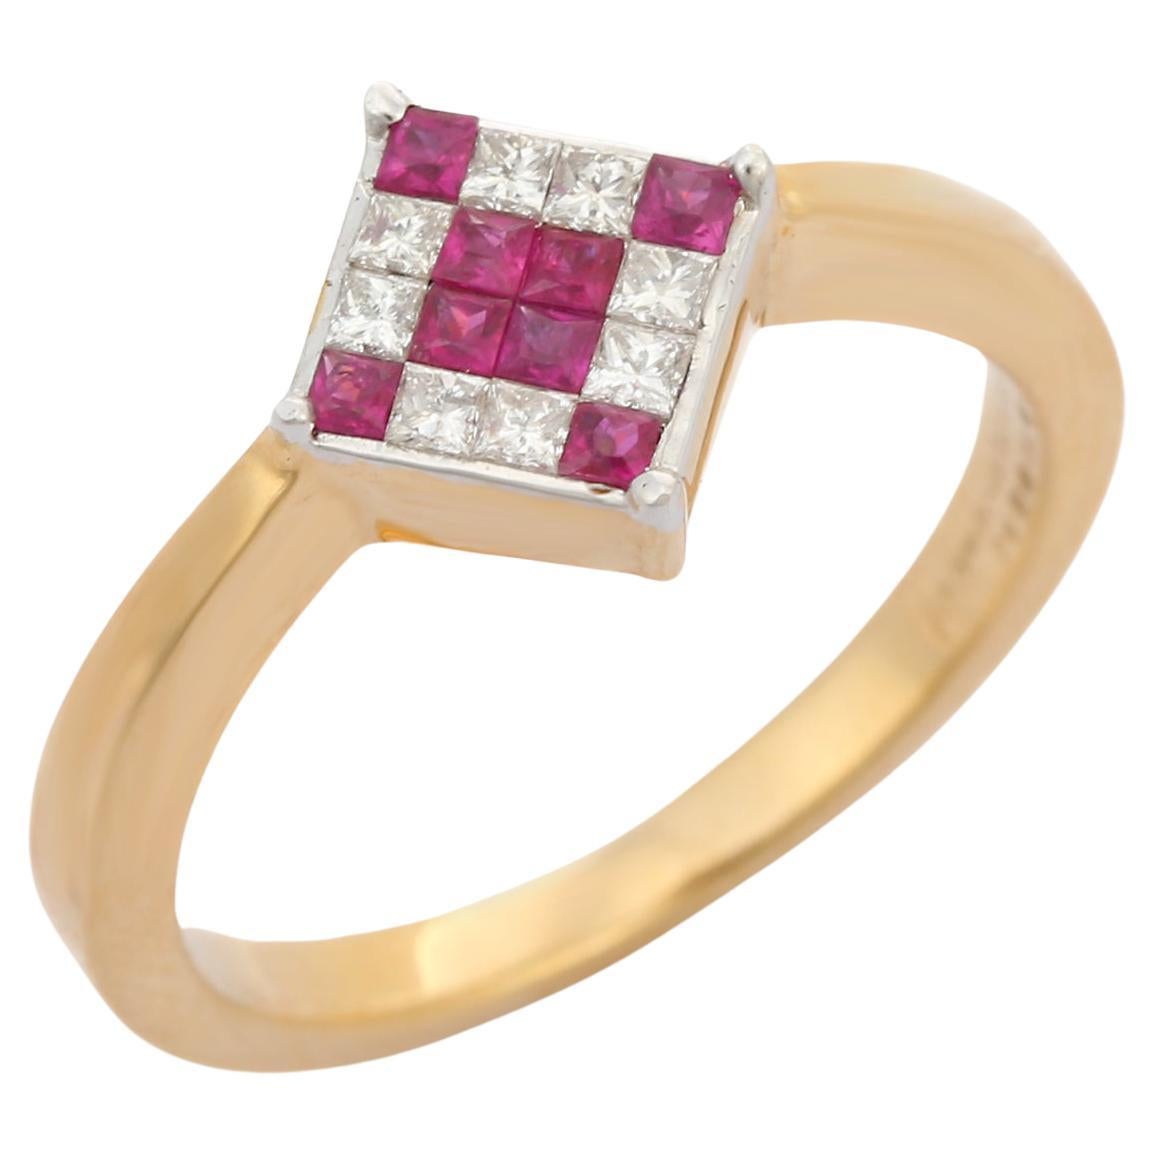 For Sale:  Minimal Mosaic Diamond Ruby Square Stacking Ring in 18K Yellow Gold Settings